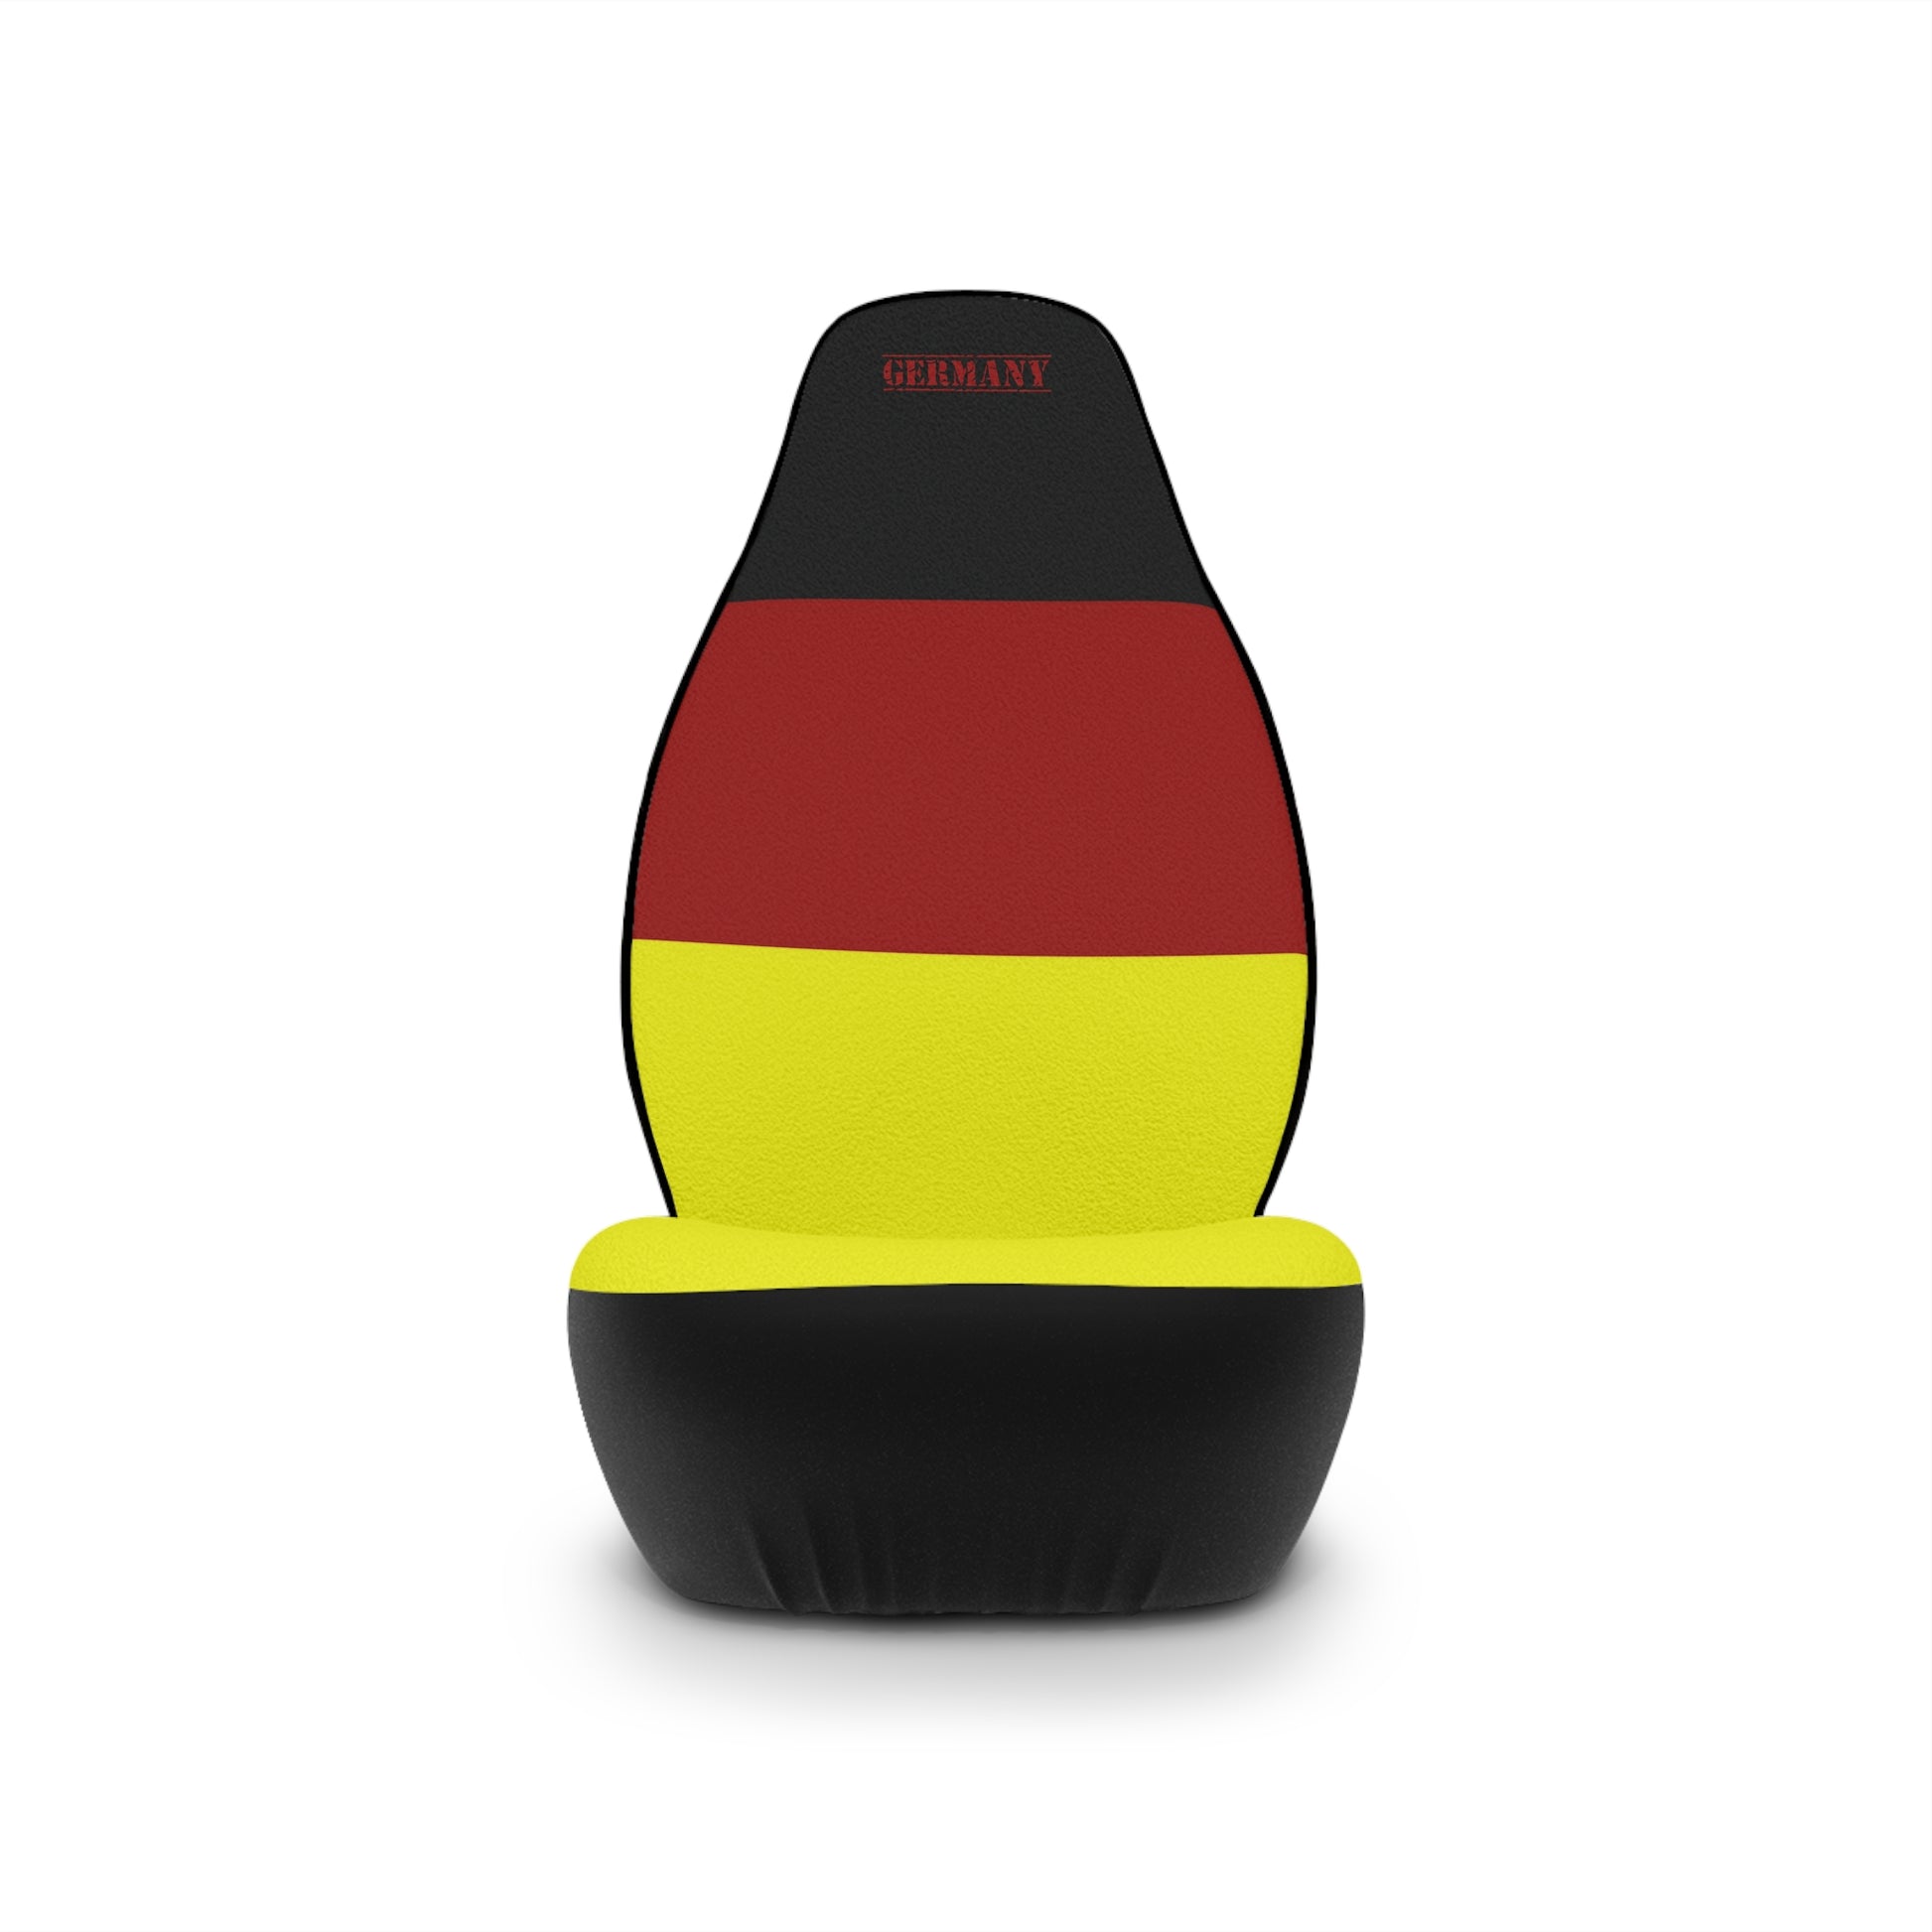 Germany Car Seat Cover